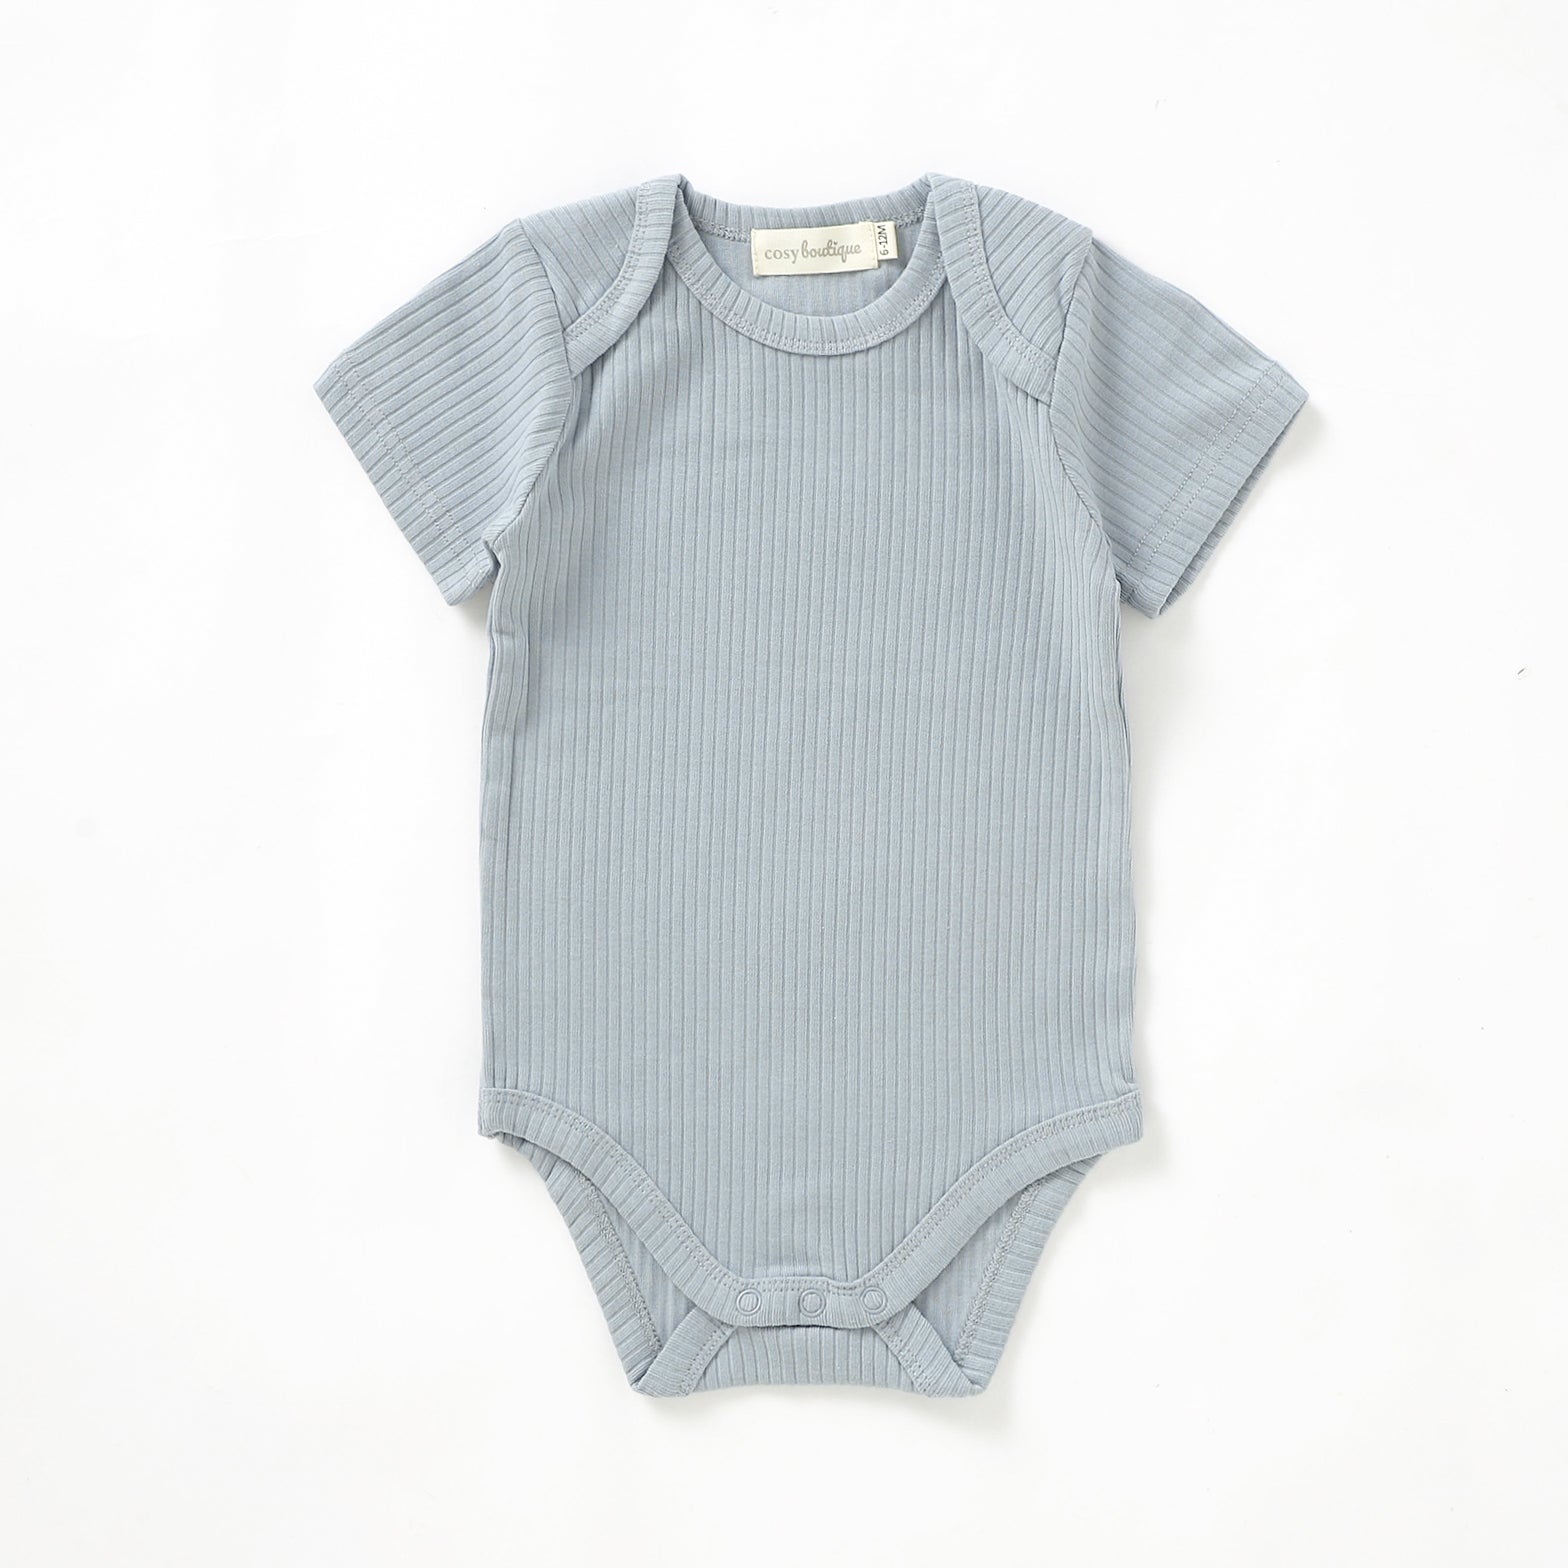 Organic Cotton Rib Short Sleeve Bodysuit 0-3 Months (000) / Duck Egg Blue | Baby Bodysuits | Boys & Girls Clothing | Babies, Toddlers & Kids | Cosy Boutique NZ